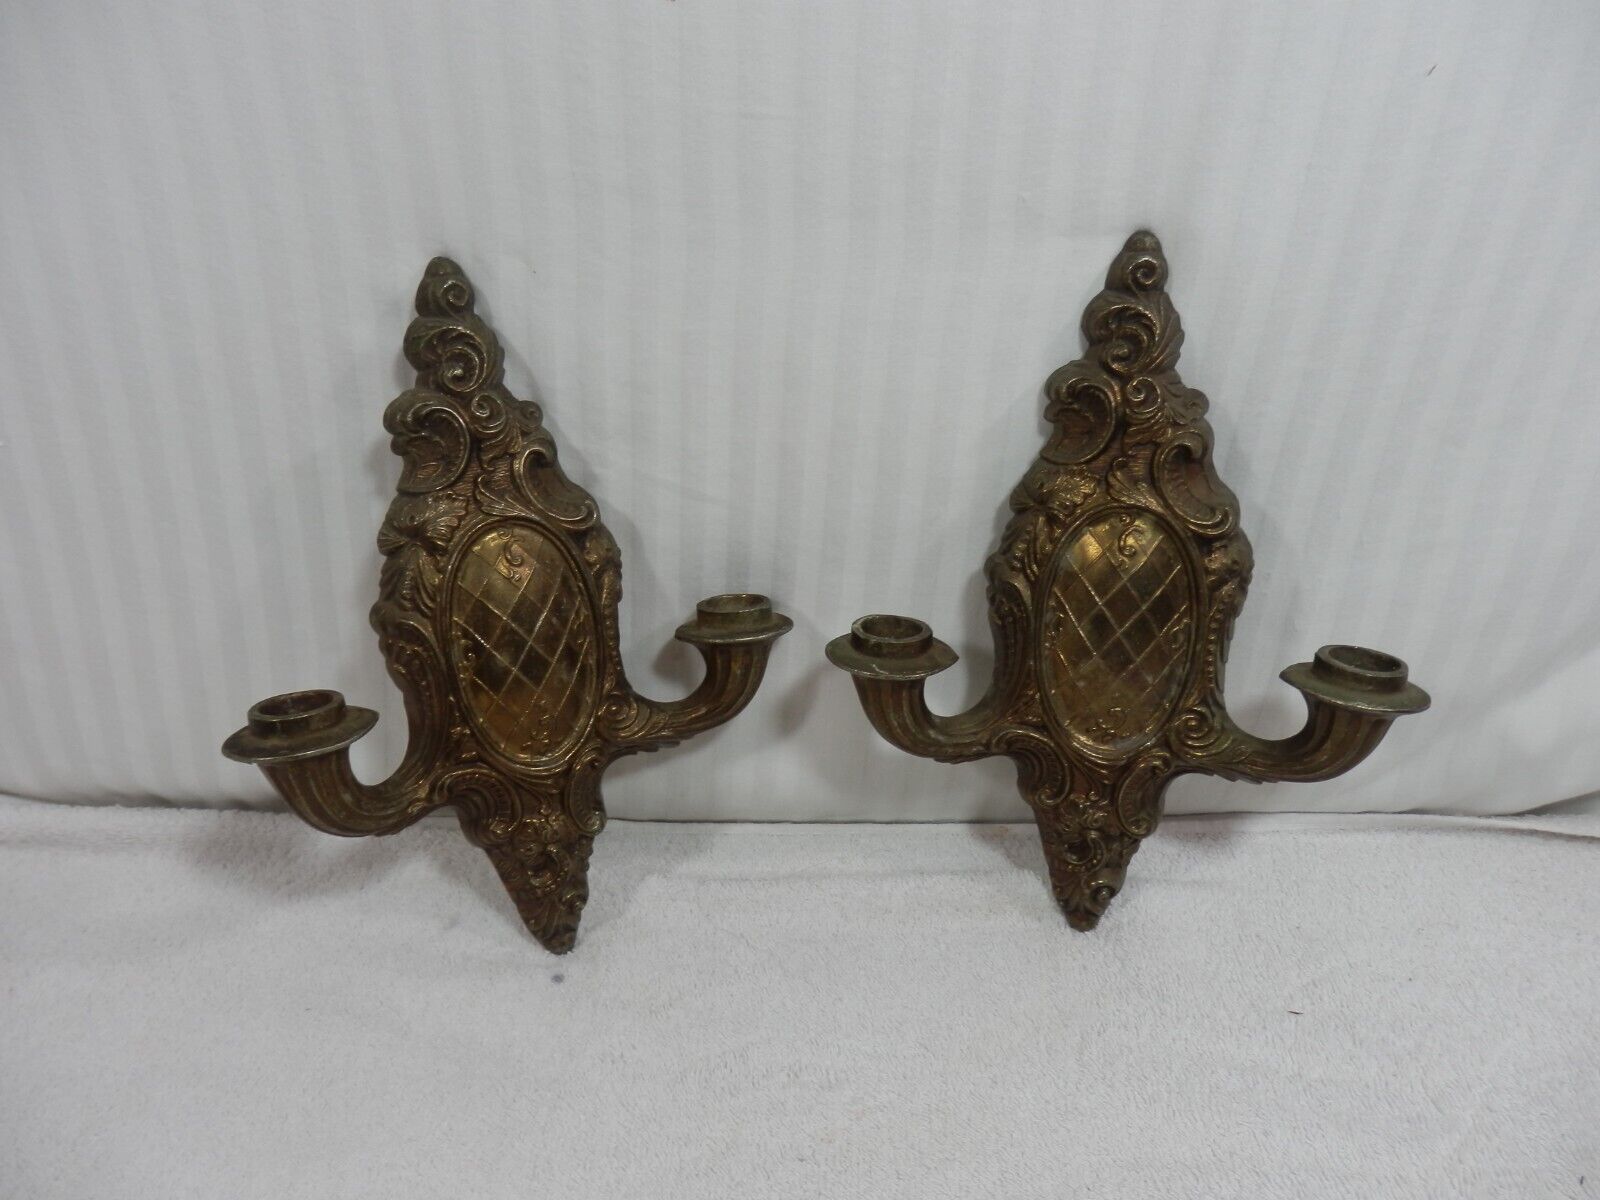 Vtg Pair 2 Brass Candle Wall Sconces Hollywood Regency Ornate